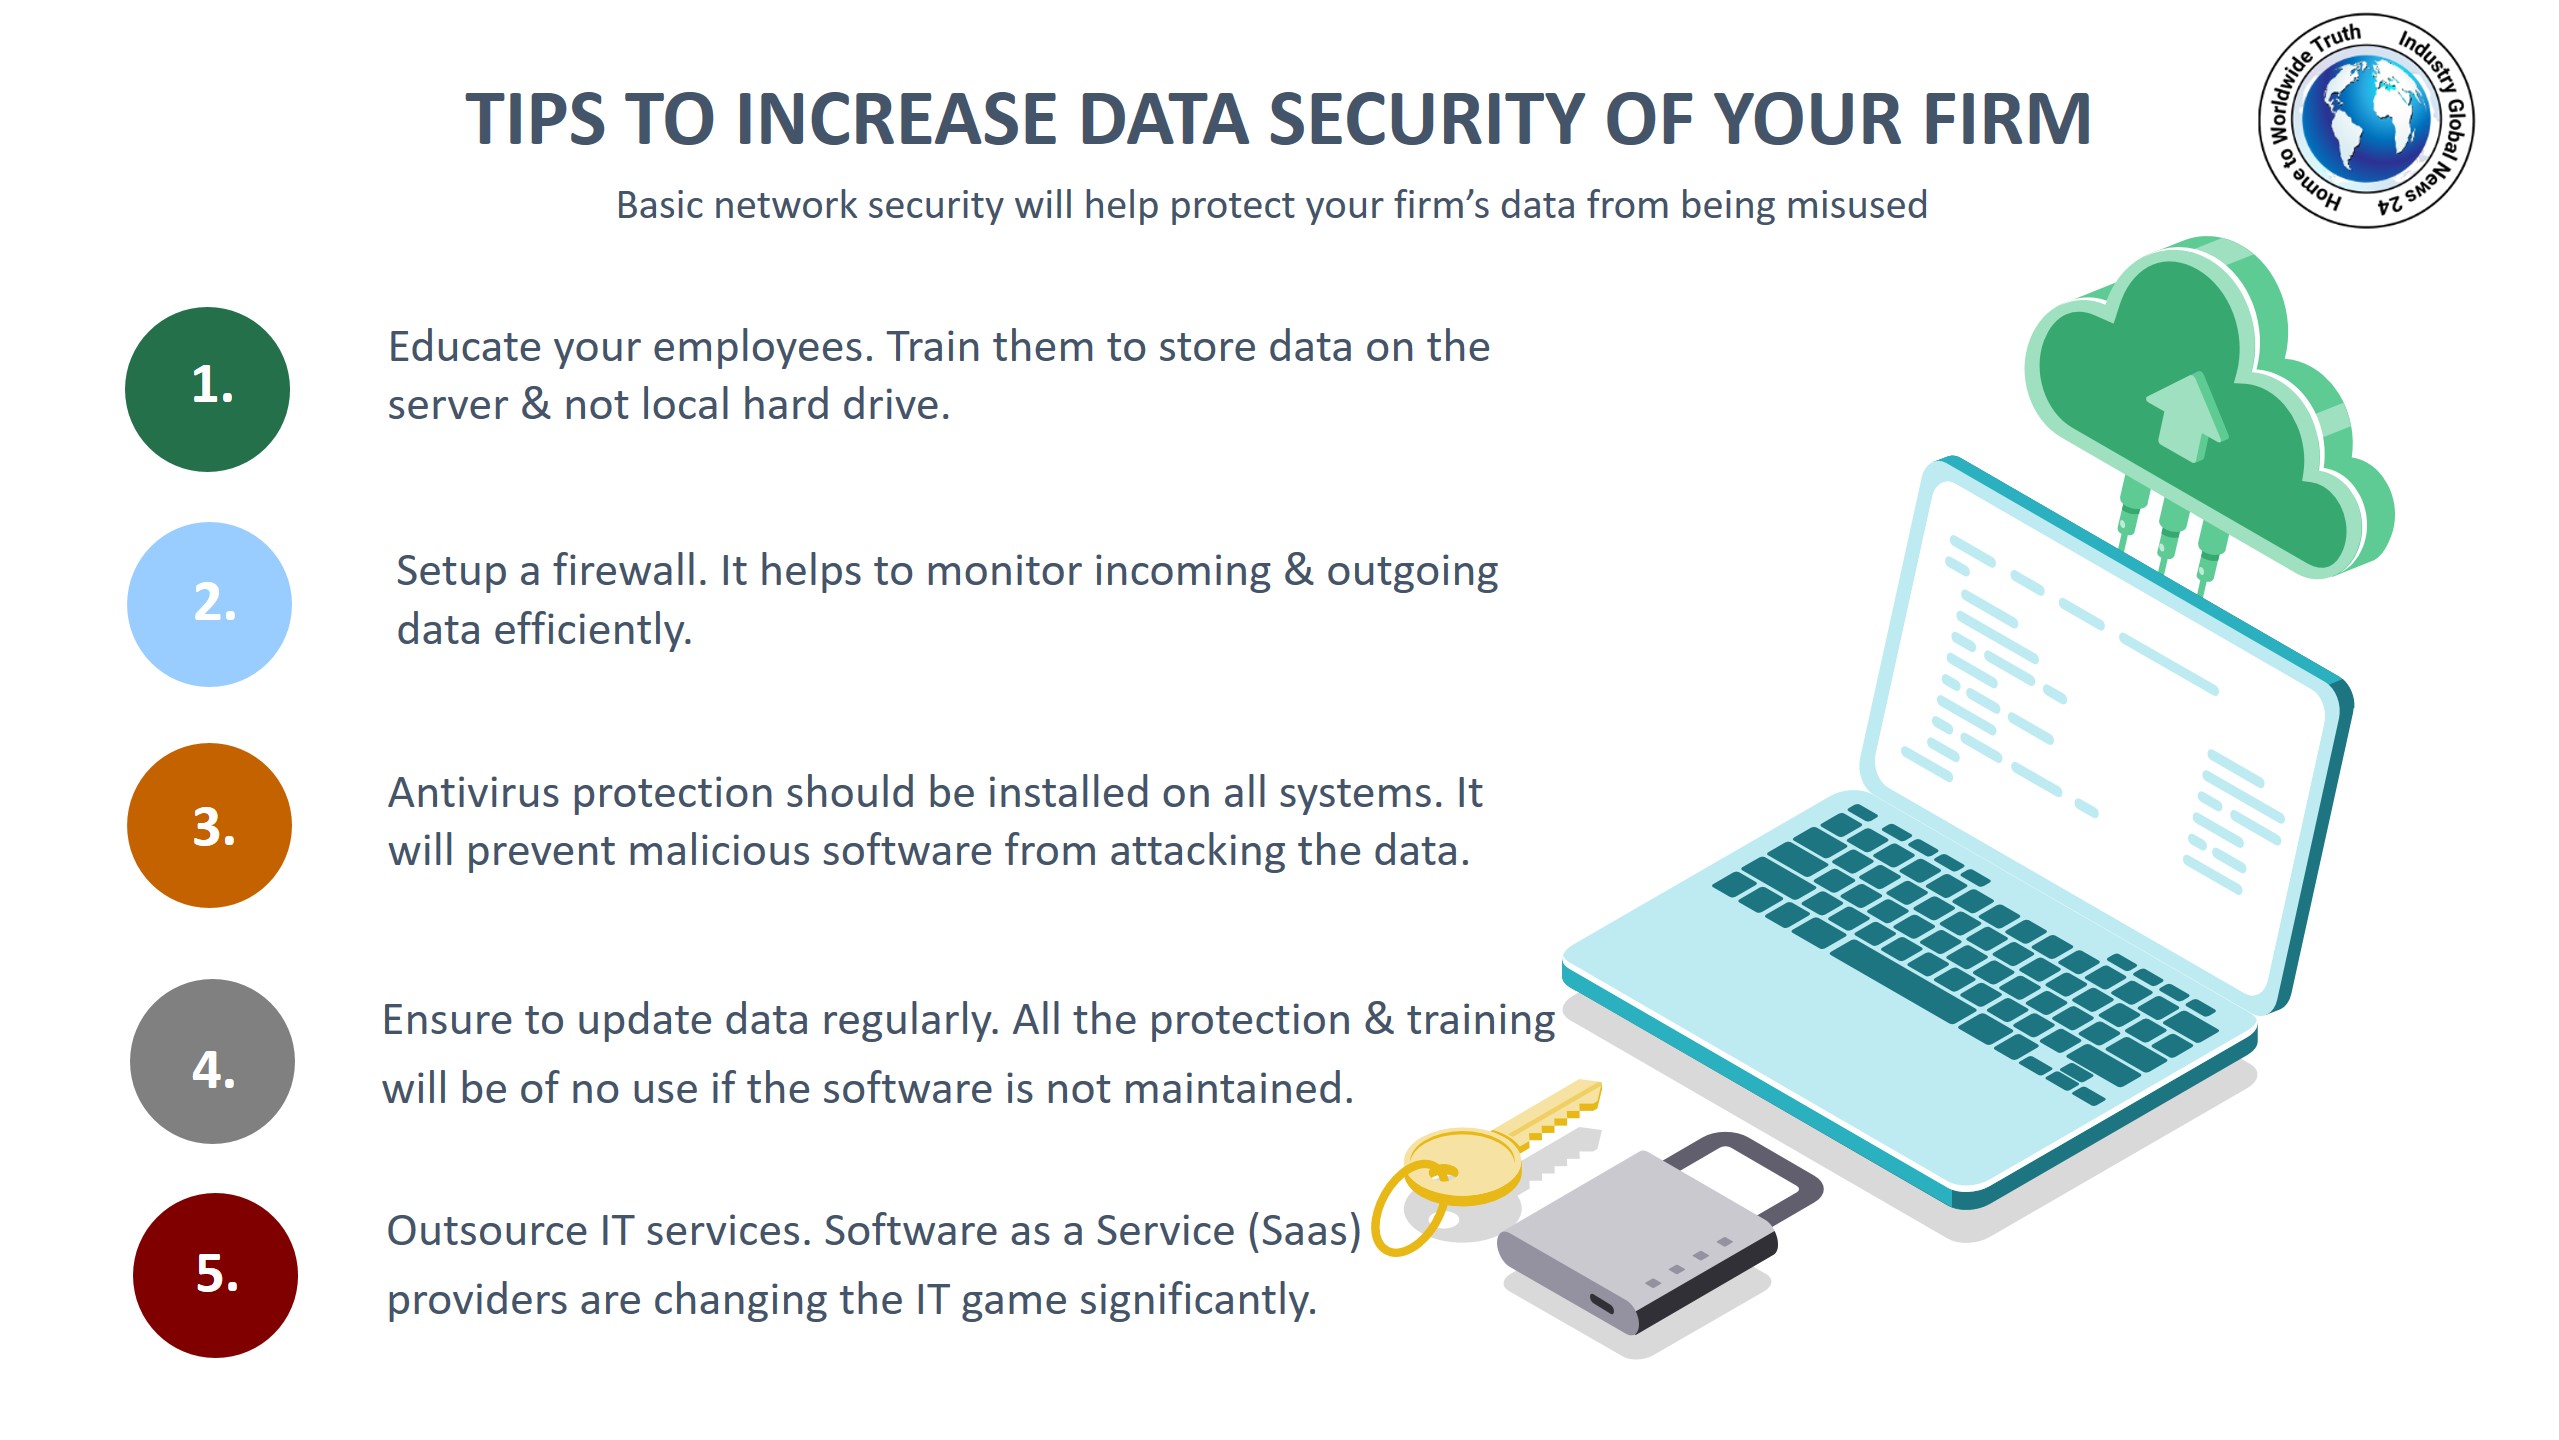 Tips to increase data security of your firm